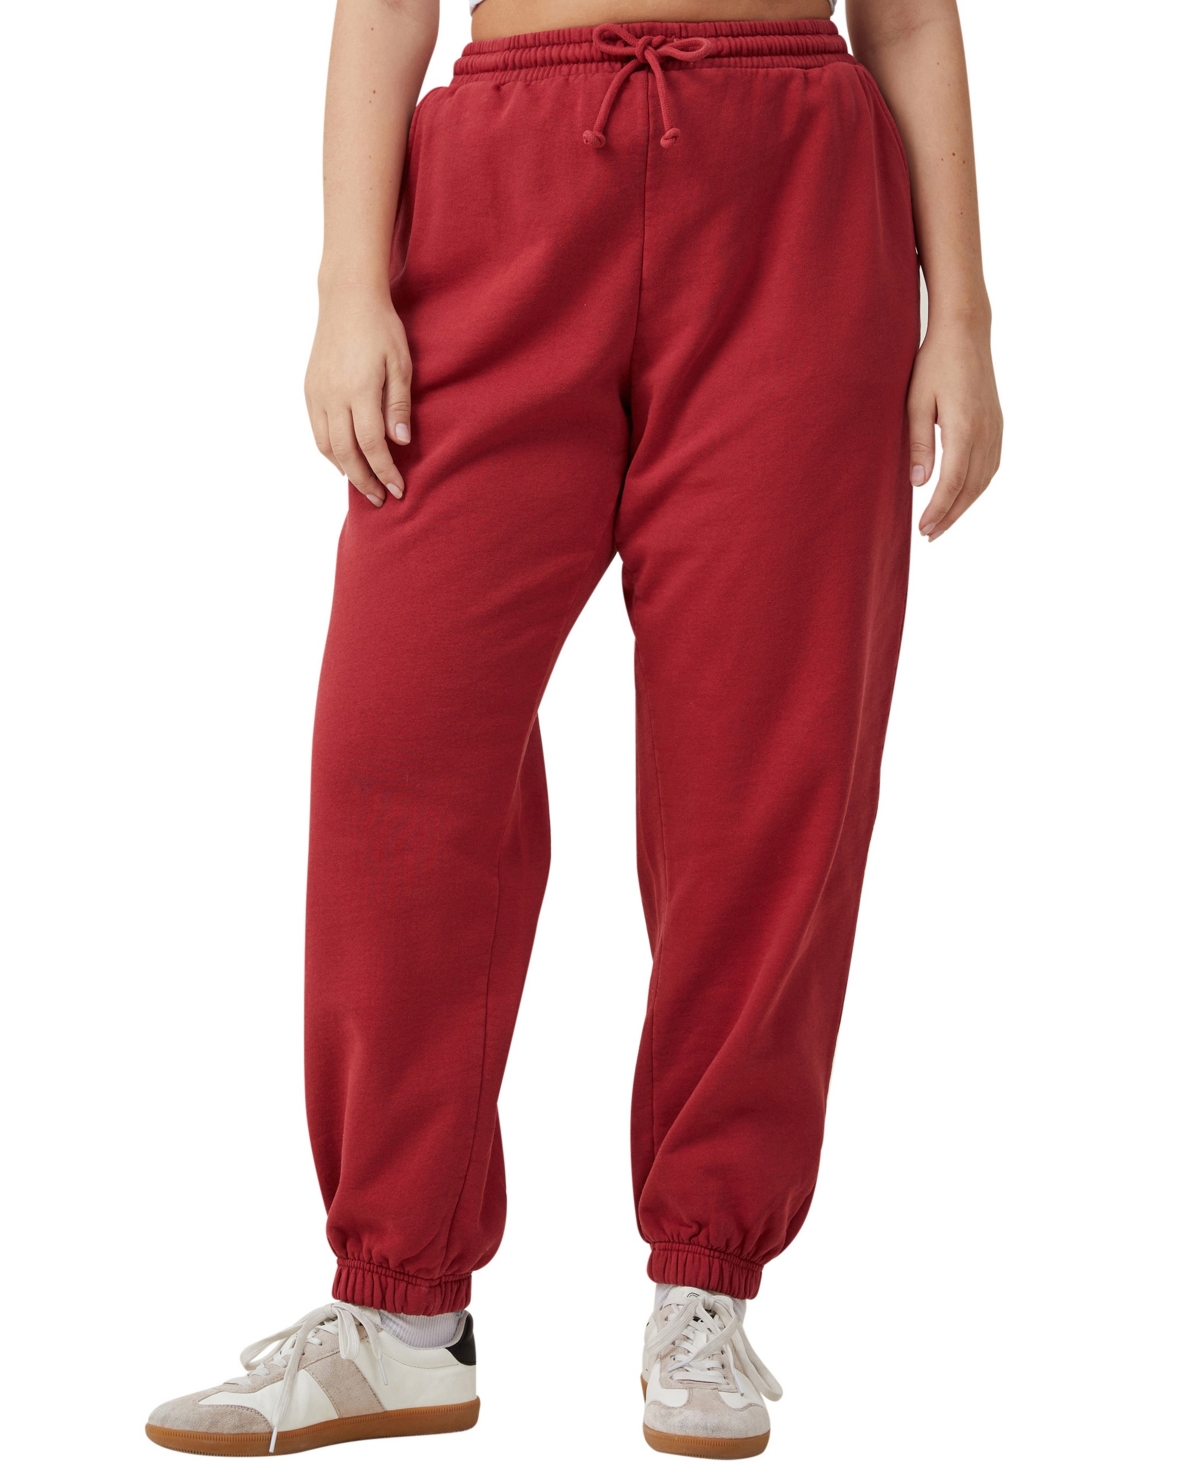 Women's Classic Washed Sweatpants - Washed Red